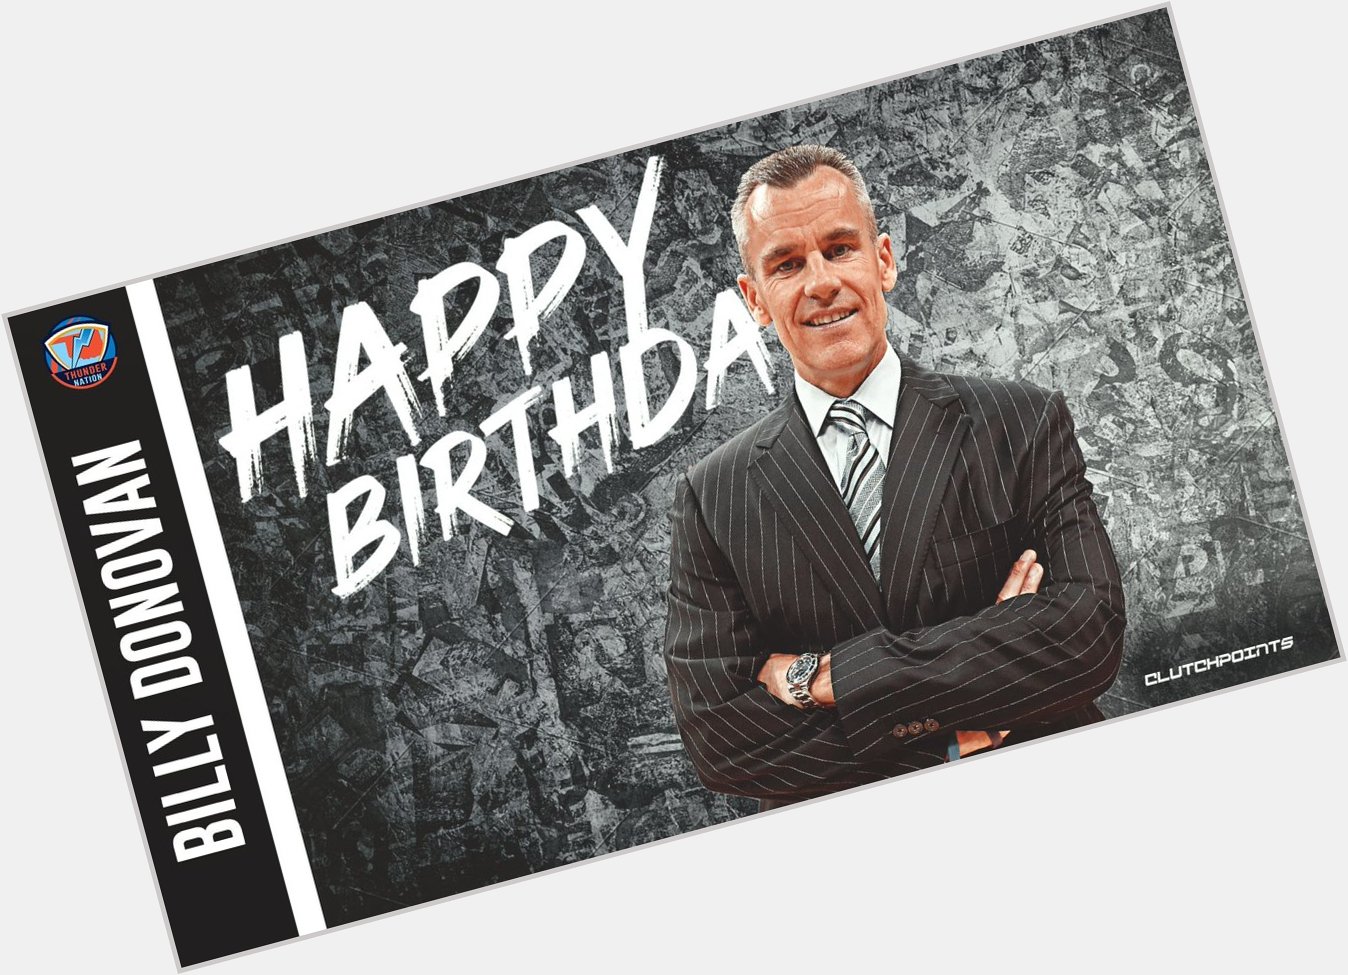 Join Thunder Nation in wishing coach Billy Donovan a happy 55th birthday! 